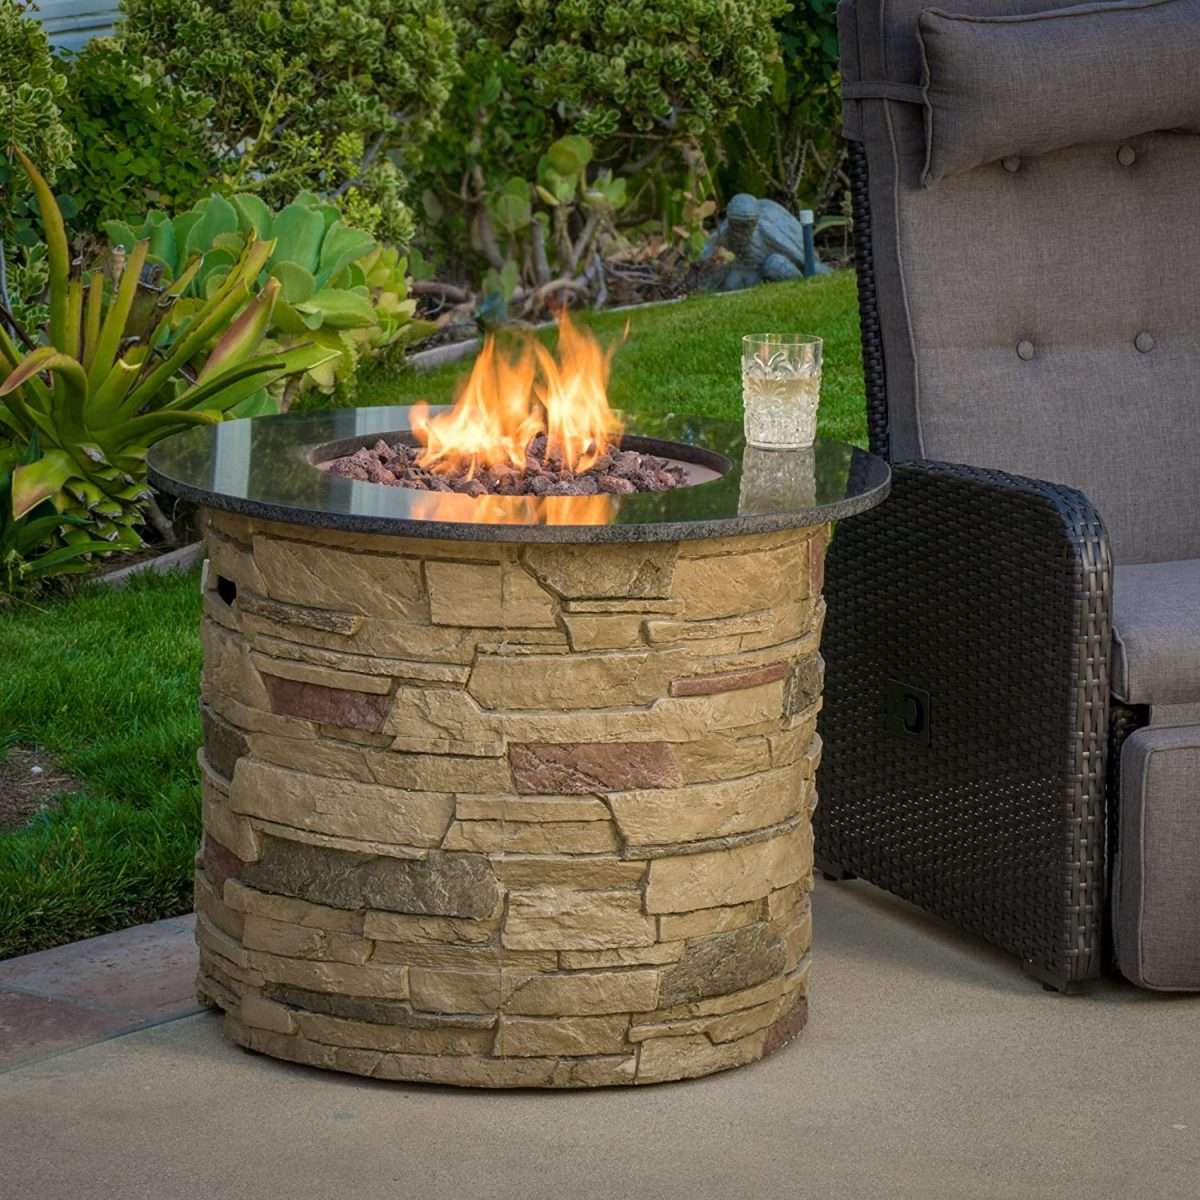 8 Best Rustic Stone Fire Pits That Don